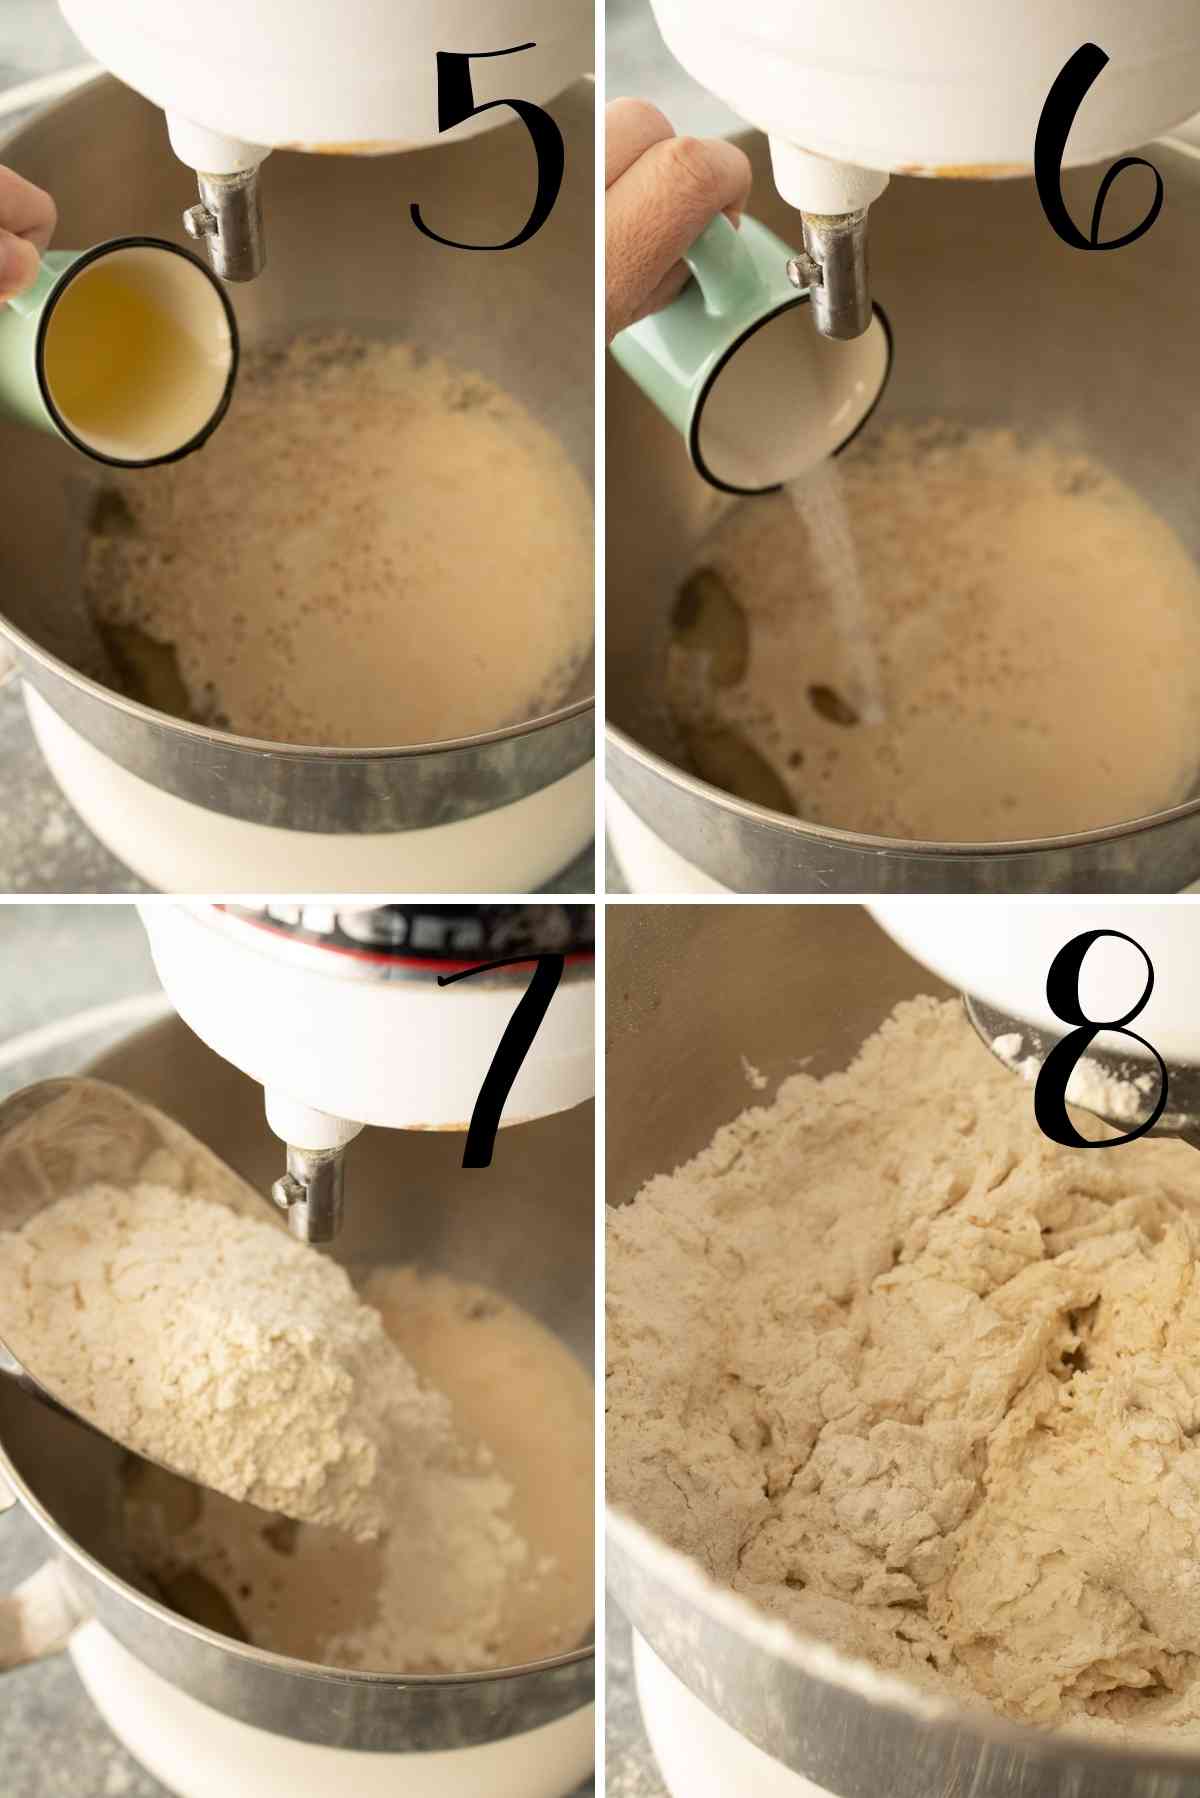 Oil, salt and flour added to the yeast mixture followed by the flour.